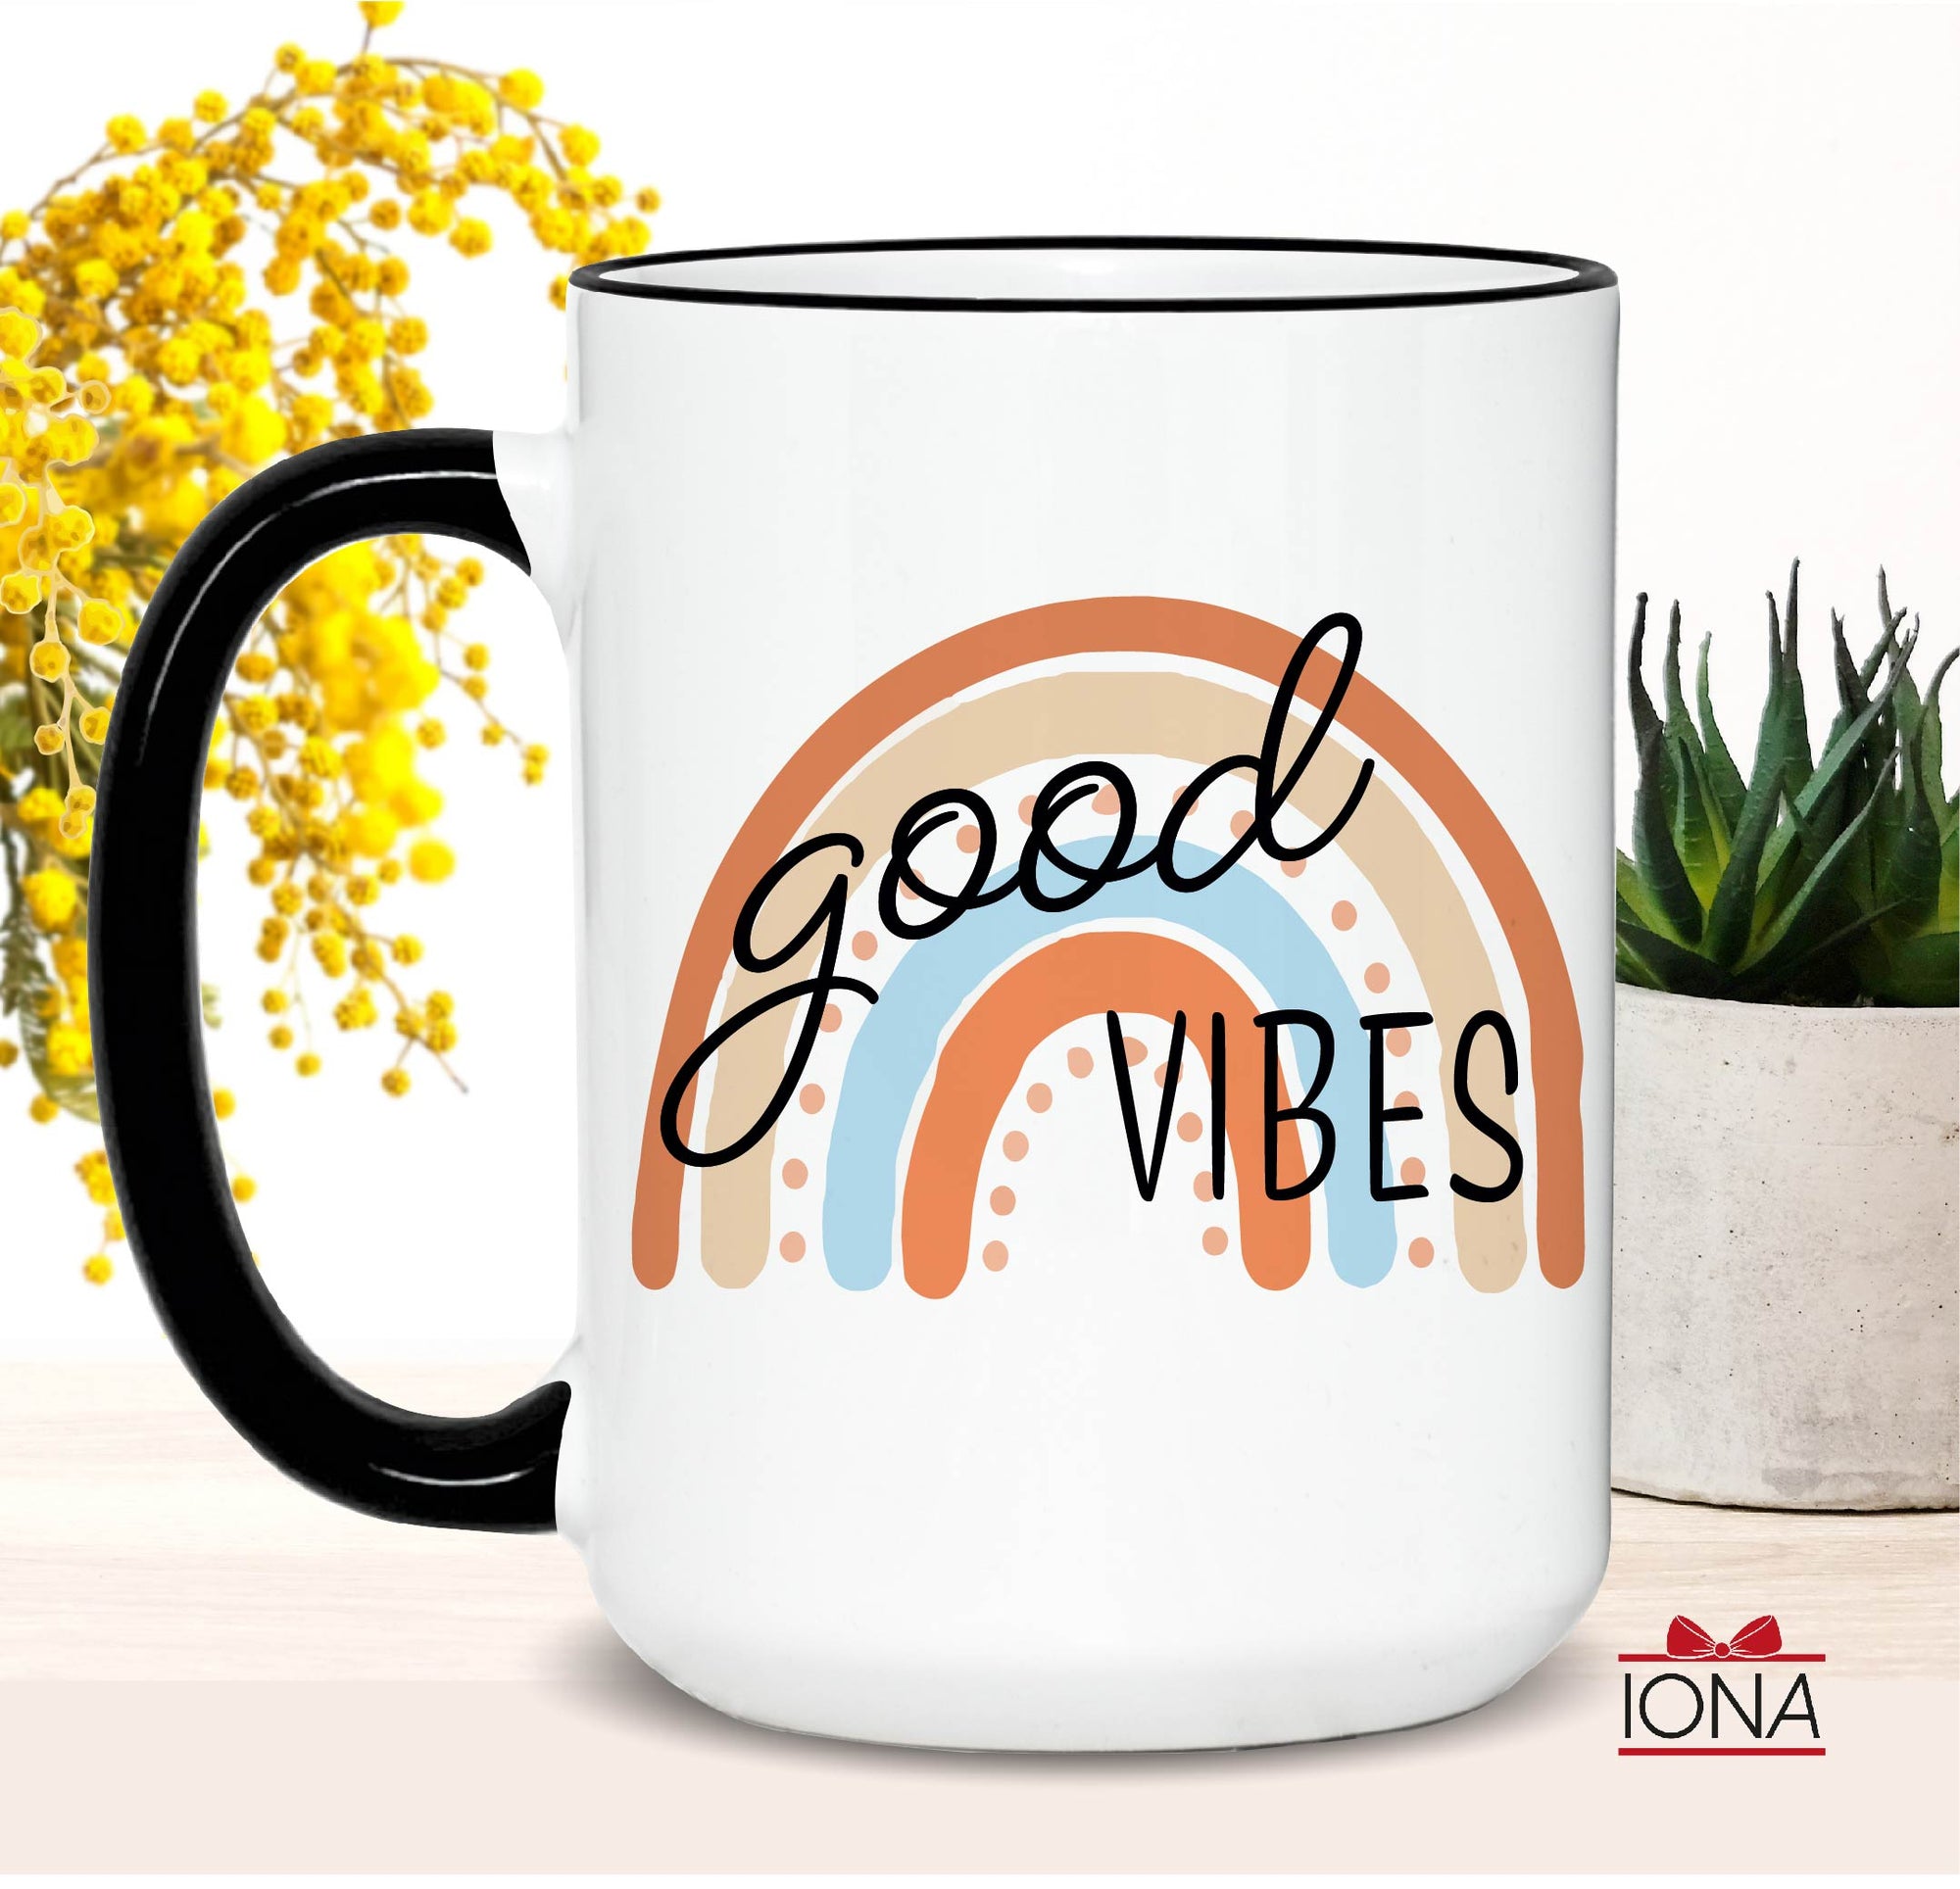 Good Vibes Morning Coffee Cup - Rainbow Positivity, Inspirational Gift